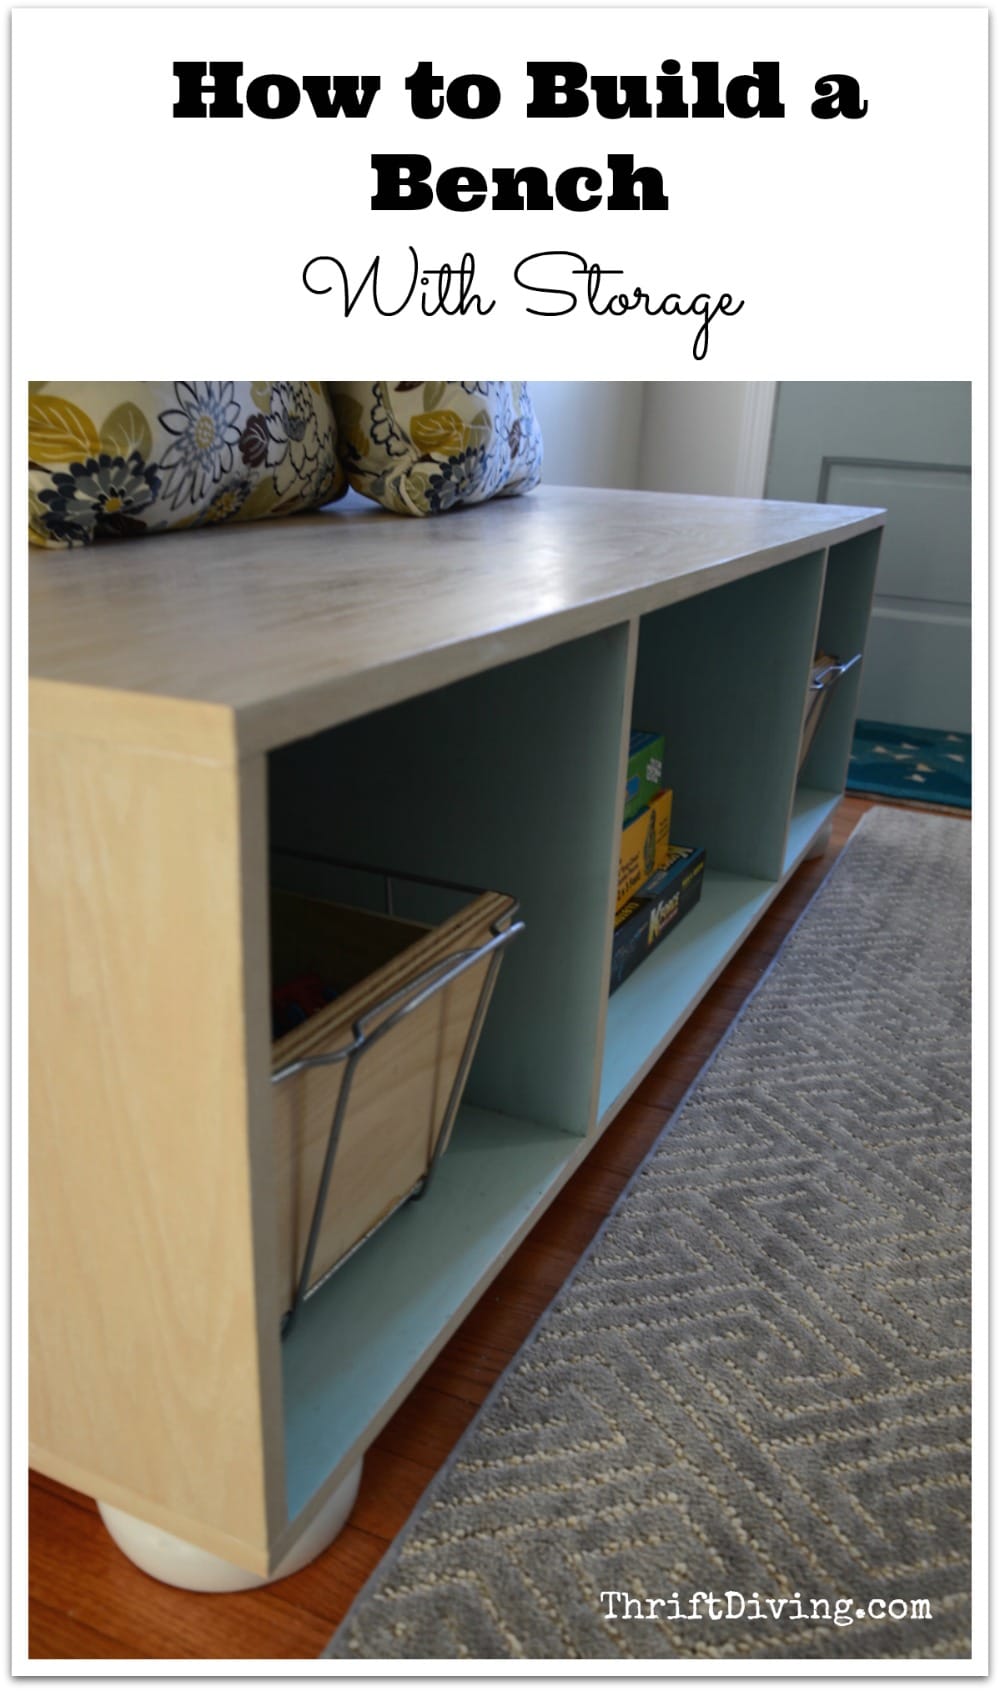 How to Build a Bench with Storage - Thrift Diving Blog